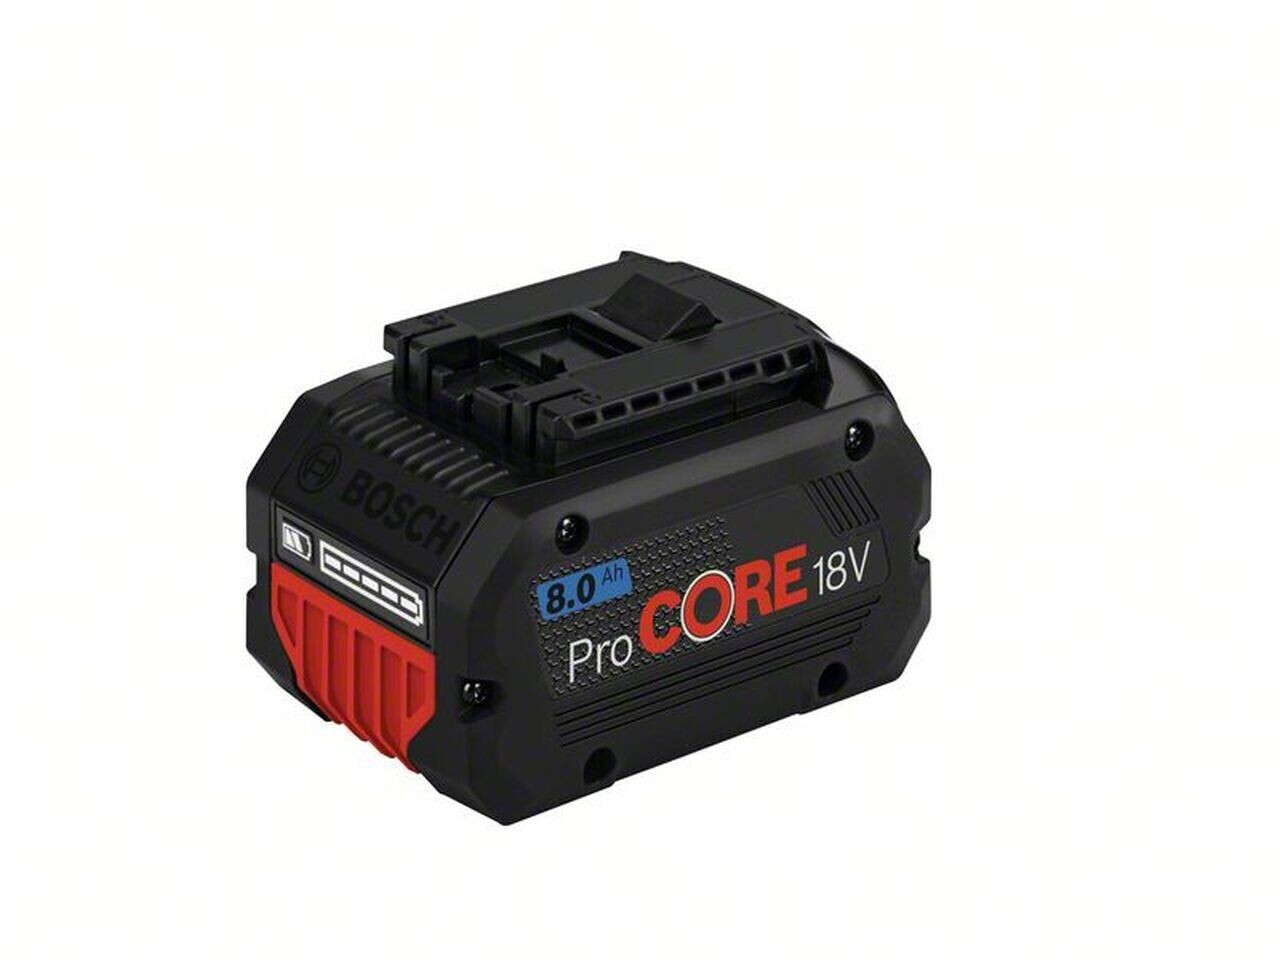 Buy Bosch Professional ProCORE 18V 8Ah (1600A016GK) from £112.99